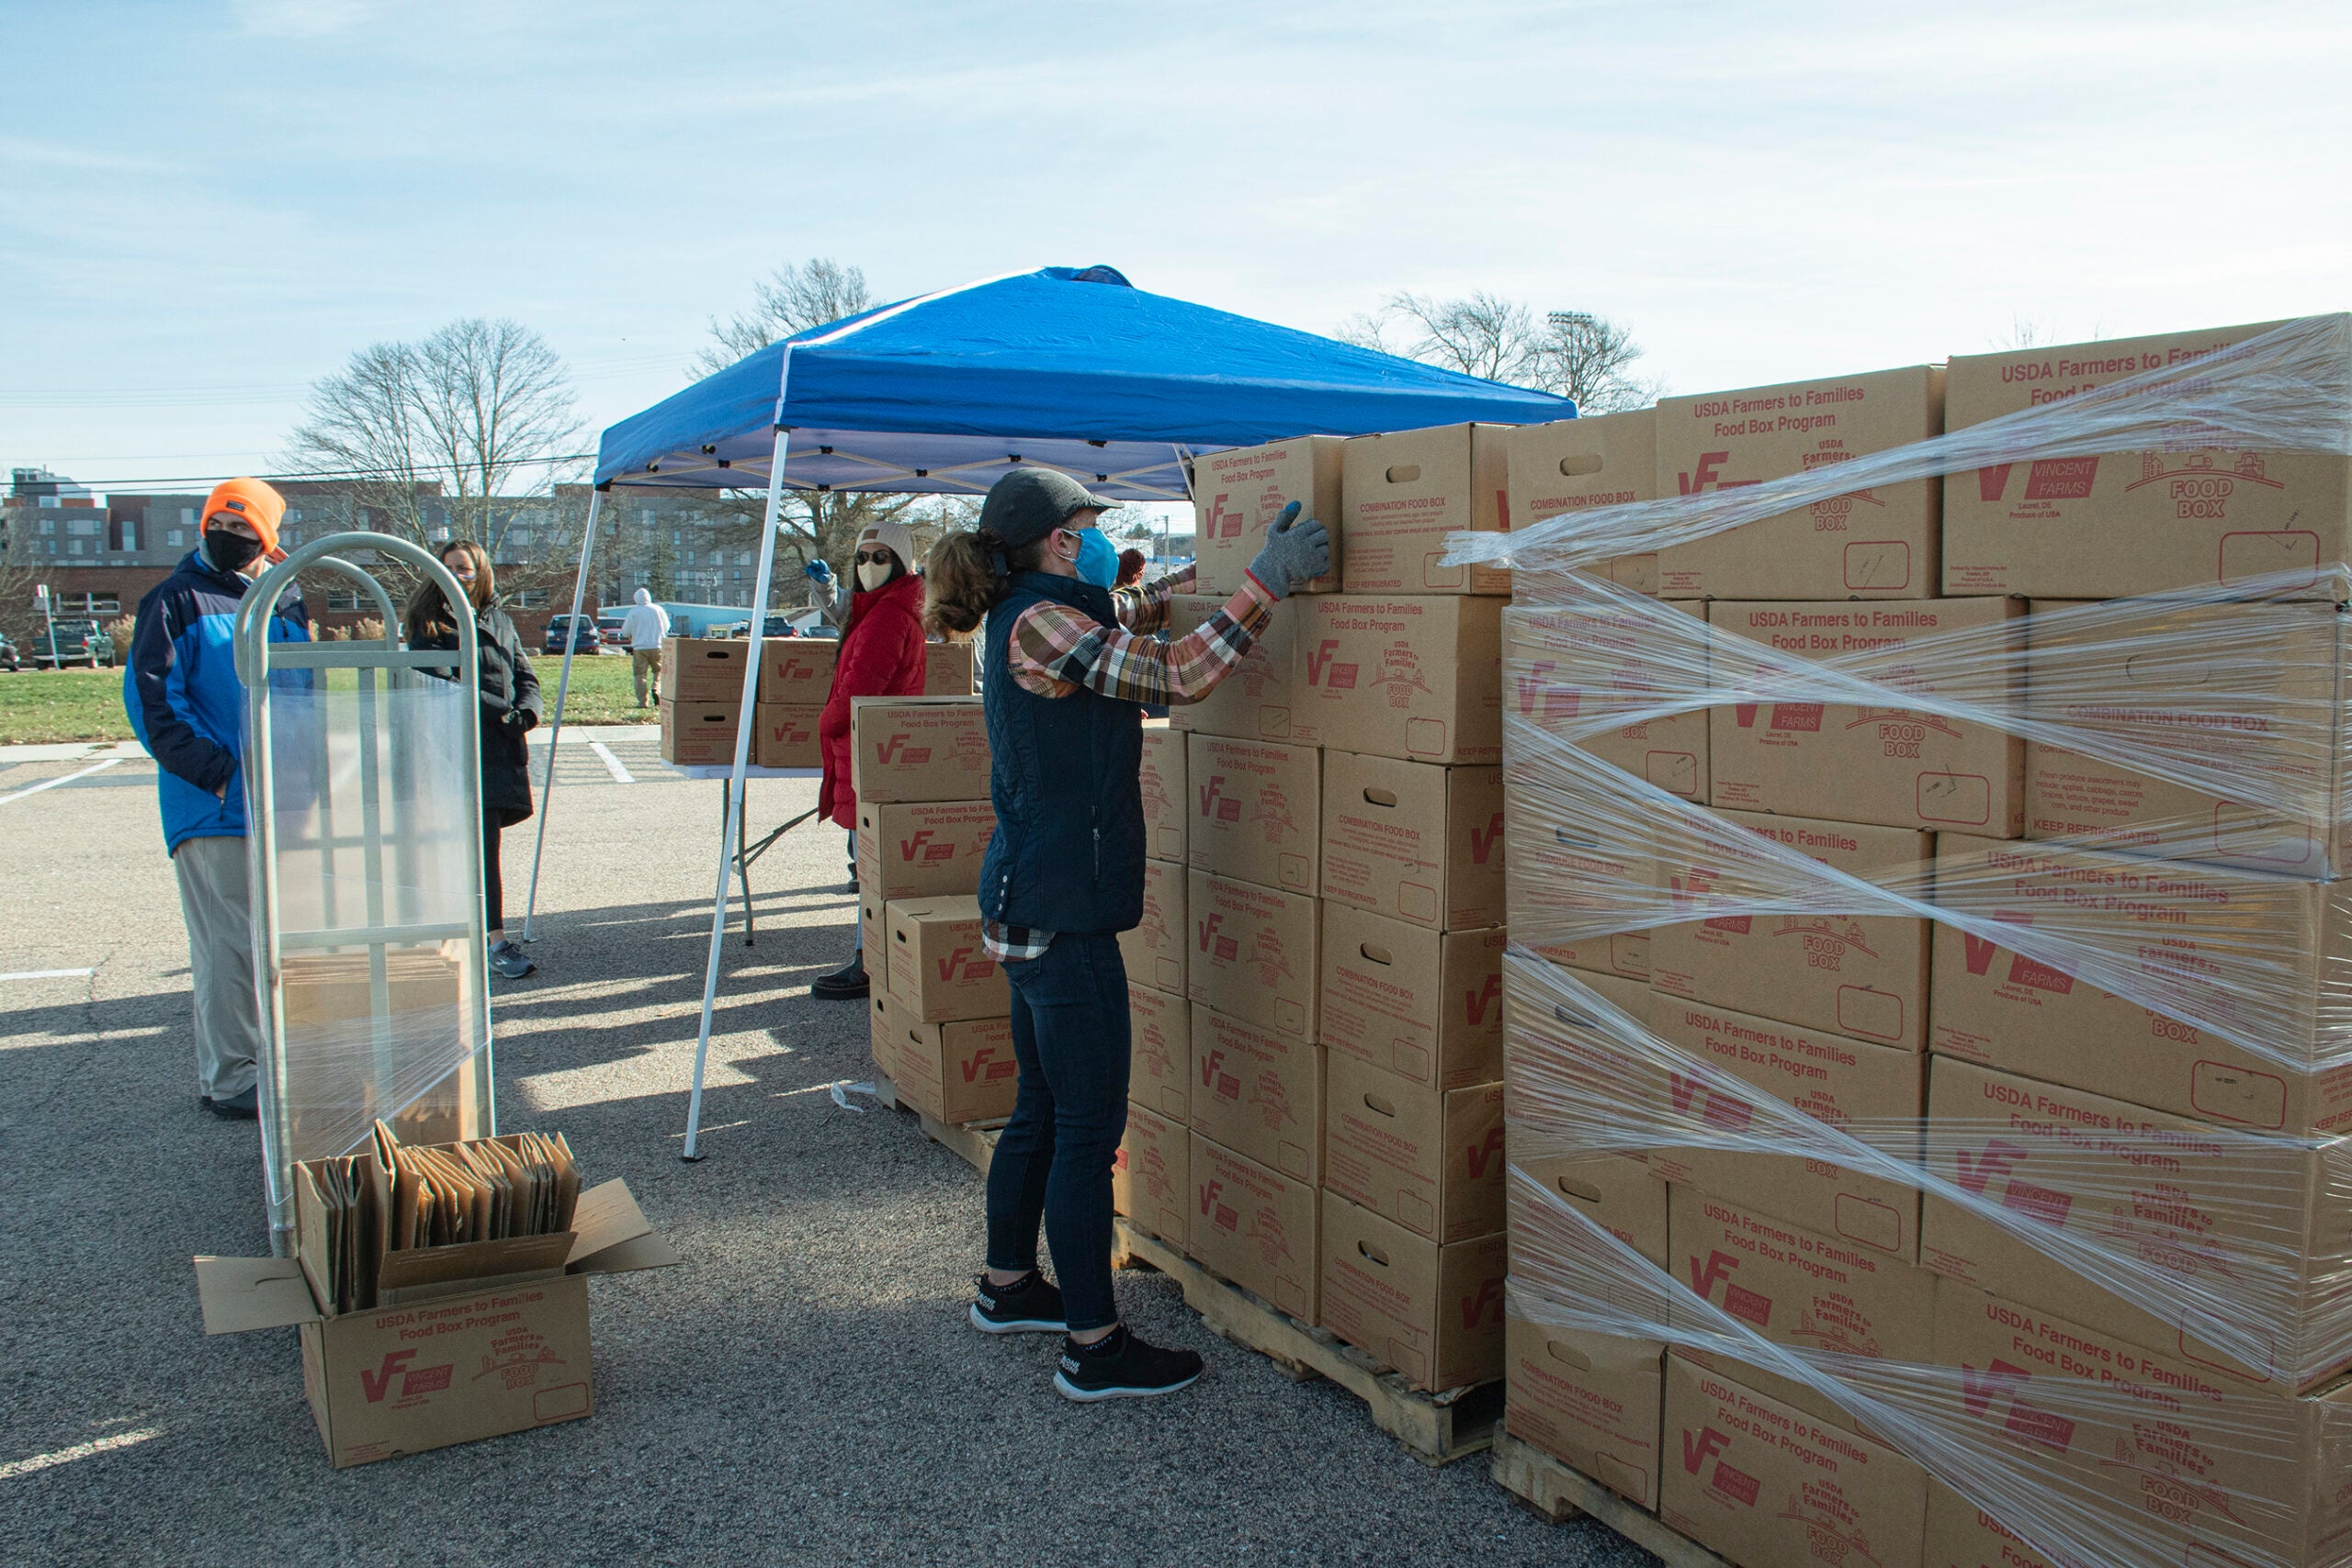 URI students and staff distribute USDA Farmers to Families food boxes